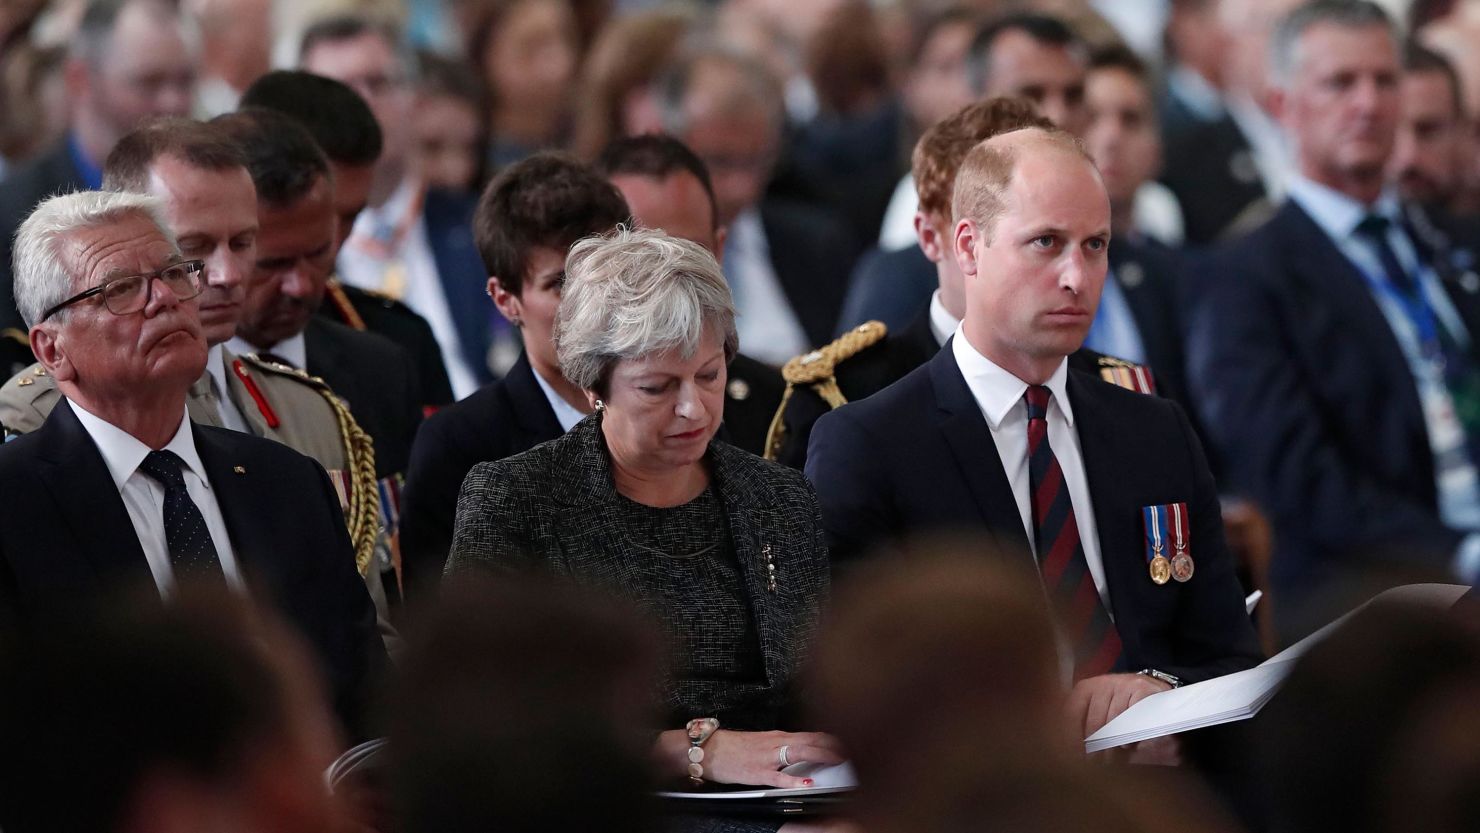 The Duke of Cambridge (R), British Prime Minister Theresa May and former German president Joachim Gauck attend a ceremony to mark the centenary of the Battle of Amiens at the cathedral in Amiens, France.